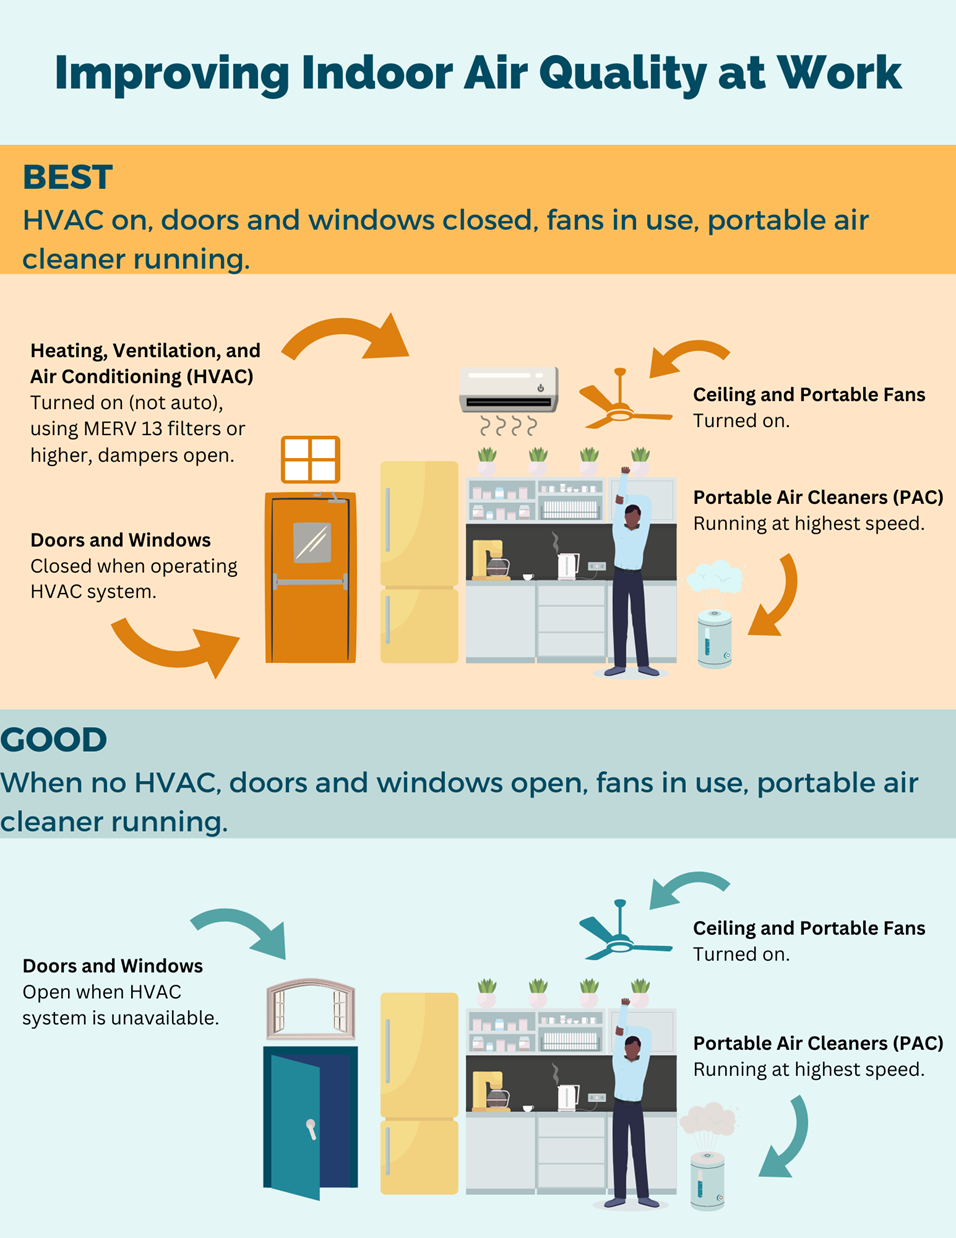 Improving Indoor Air Quality through HVAC Systems